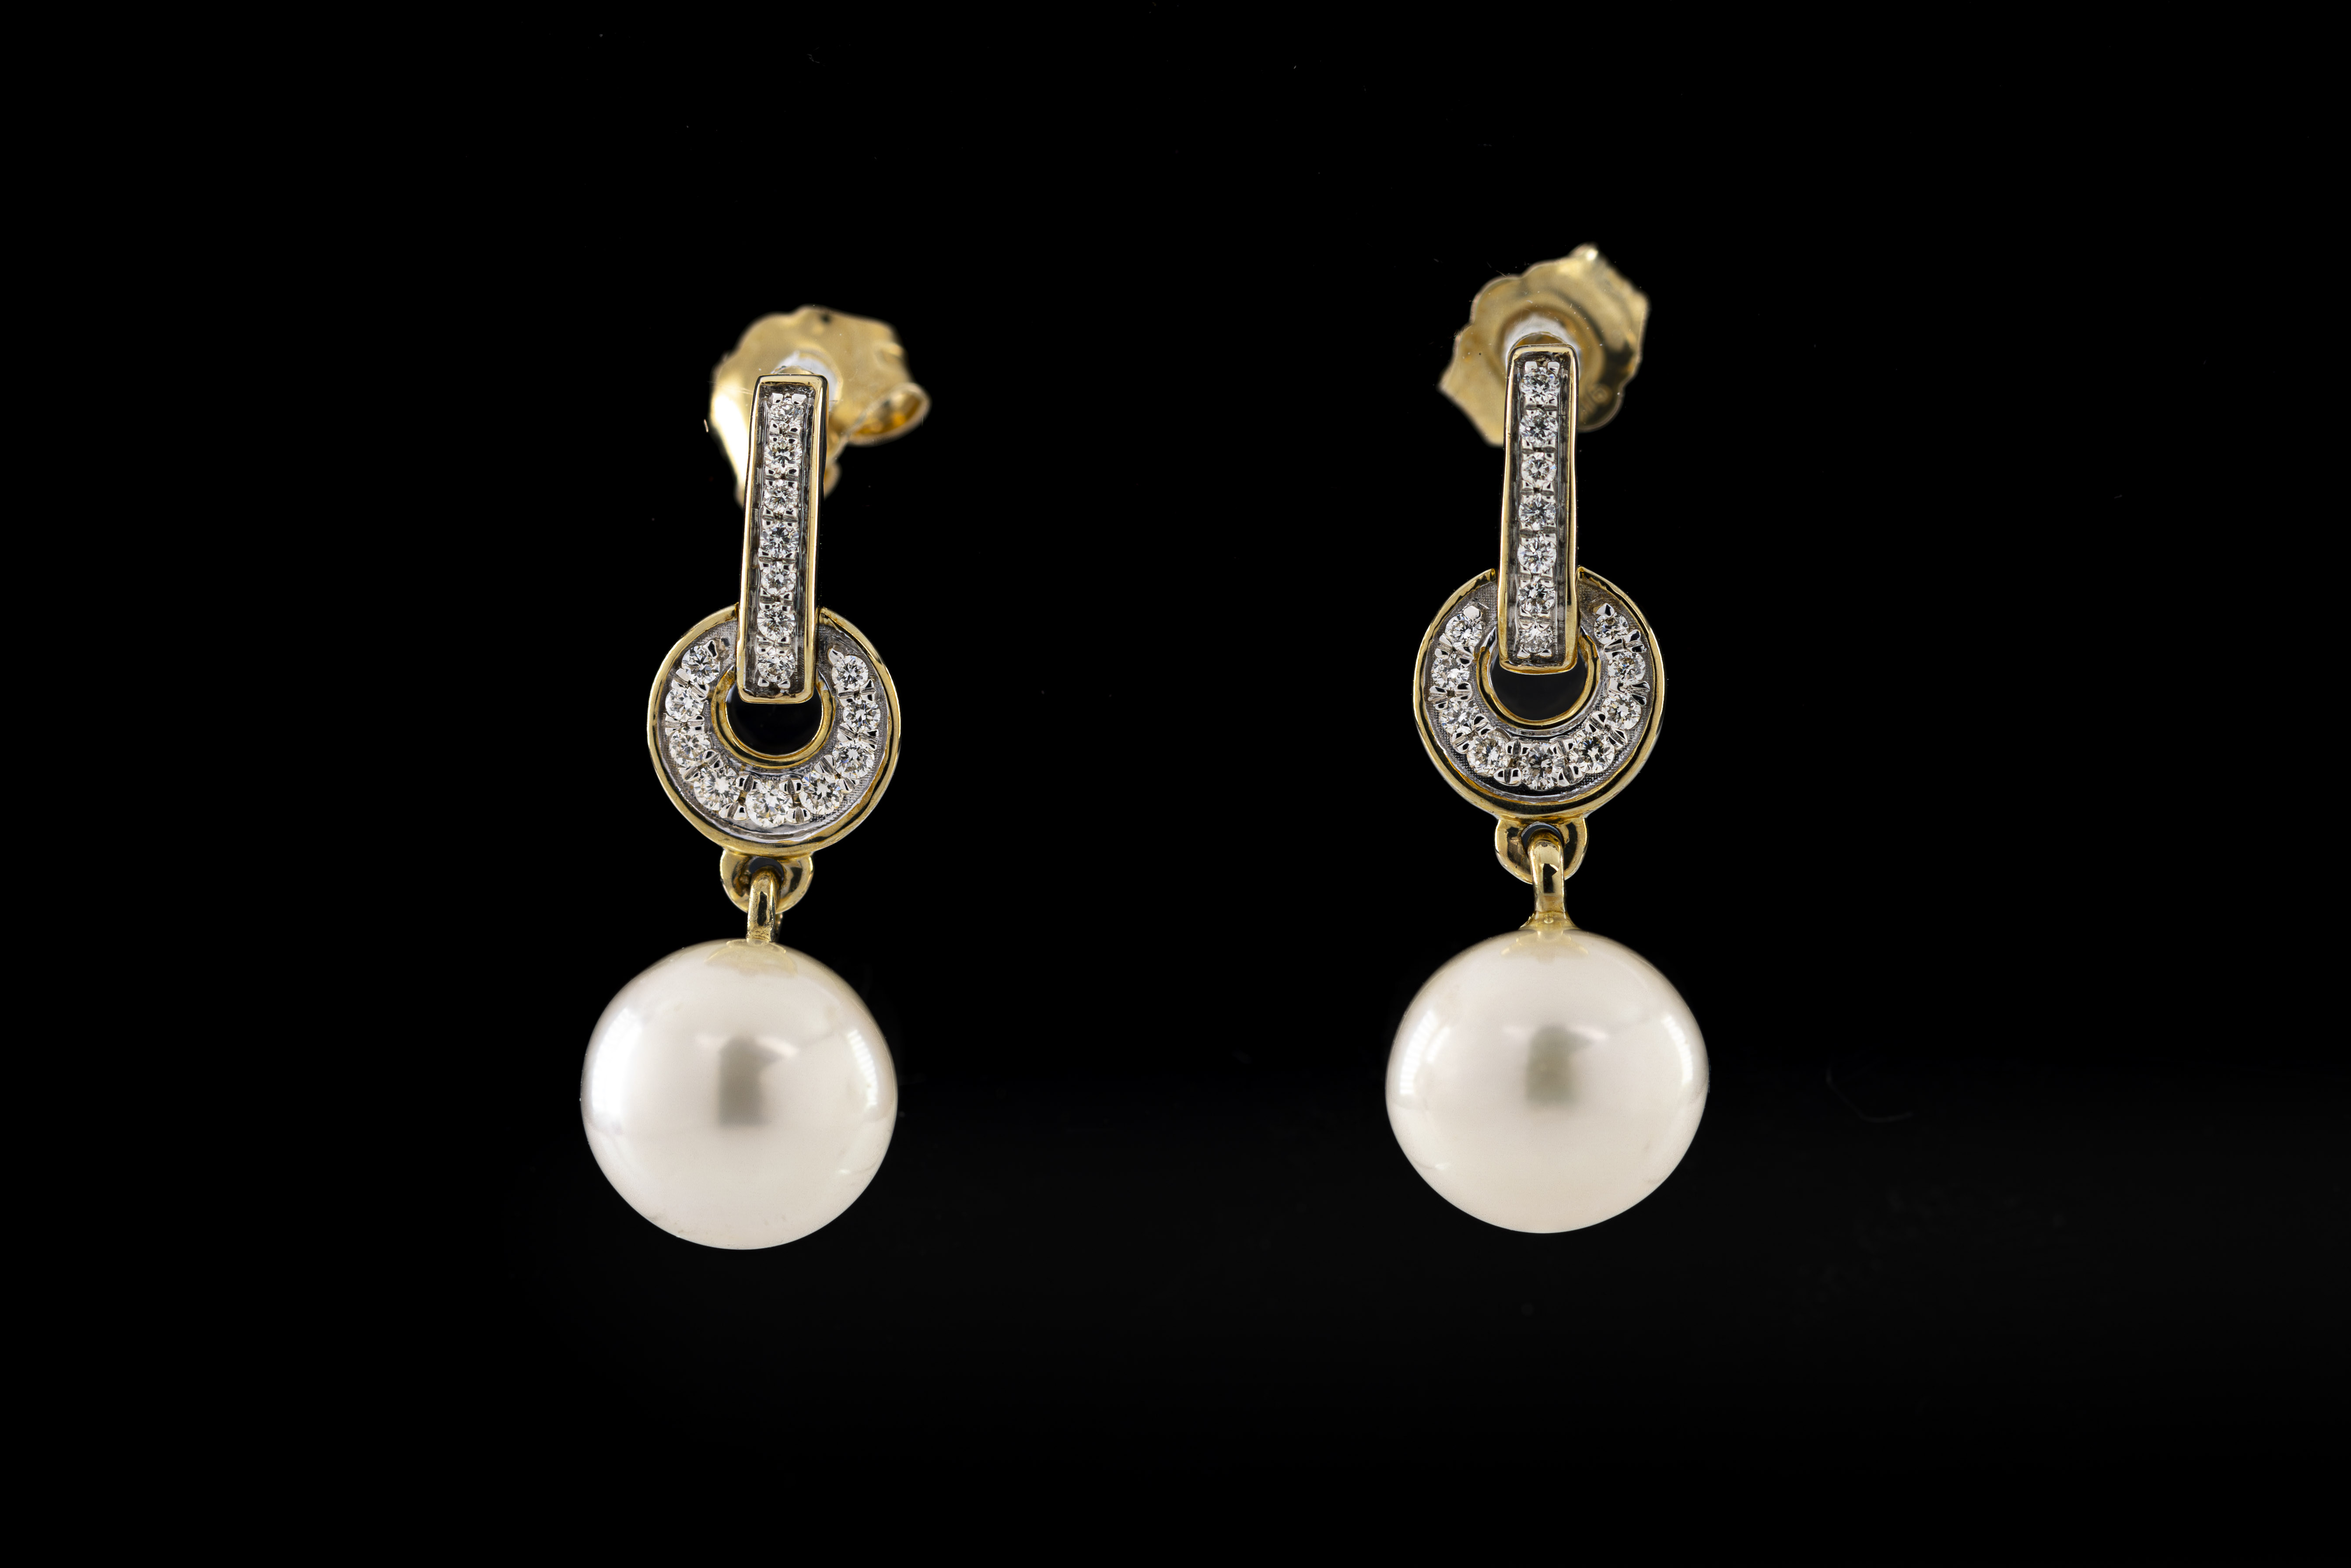 A pair of 9ct yellow gold diamond and cultured pearl drop earrings, each 8mm freshwater cultured